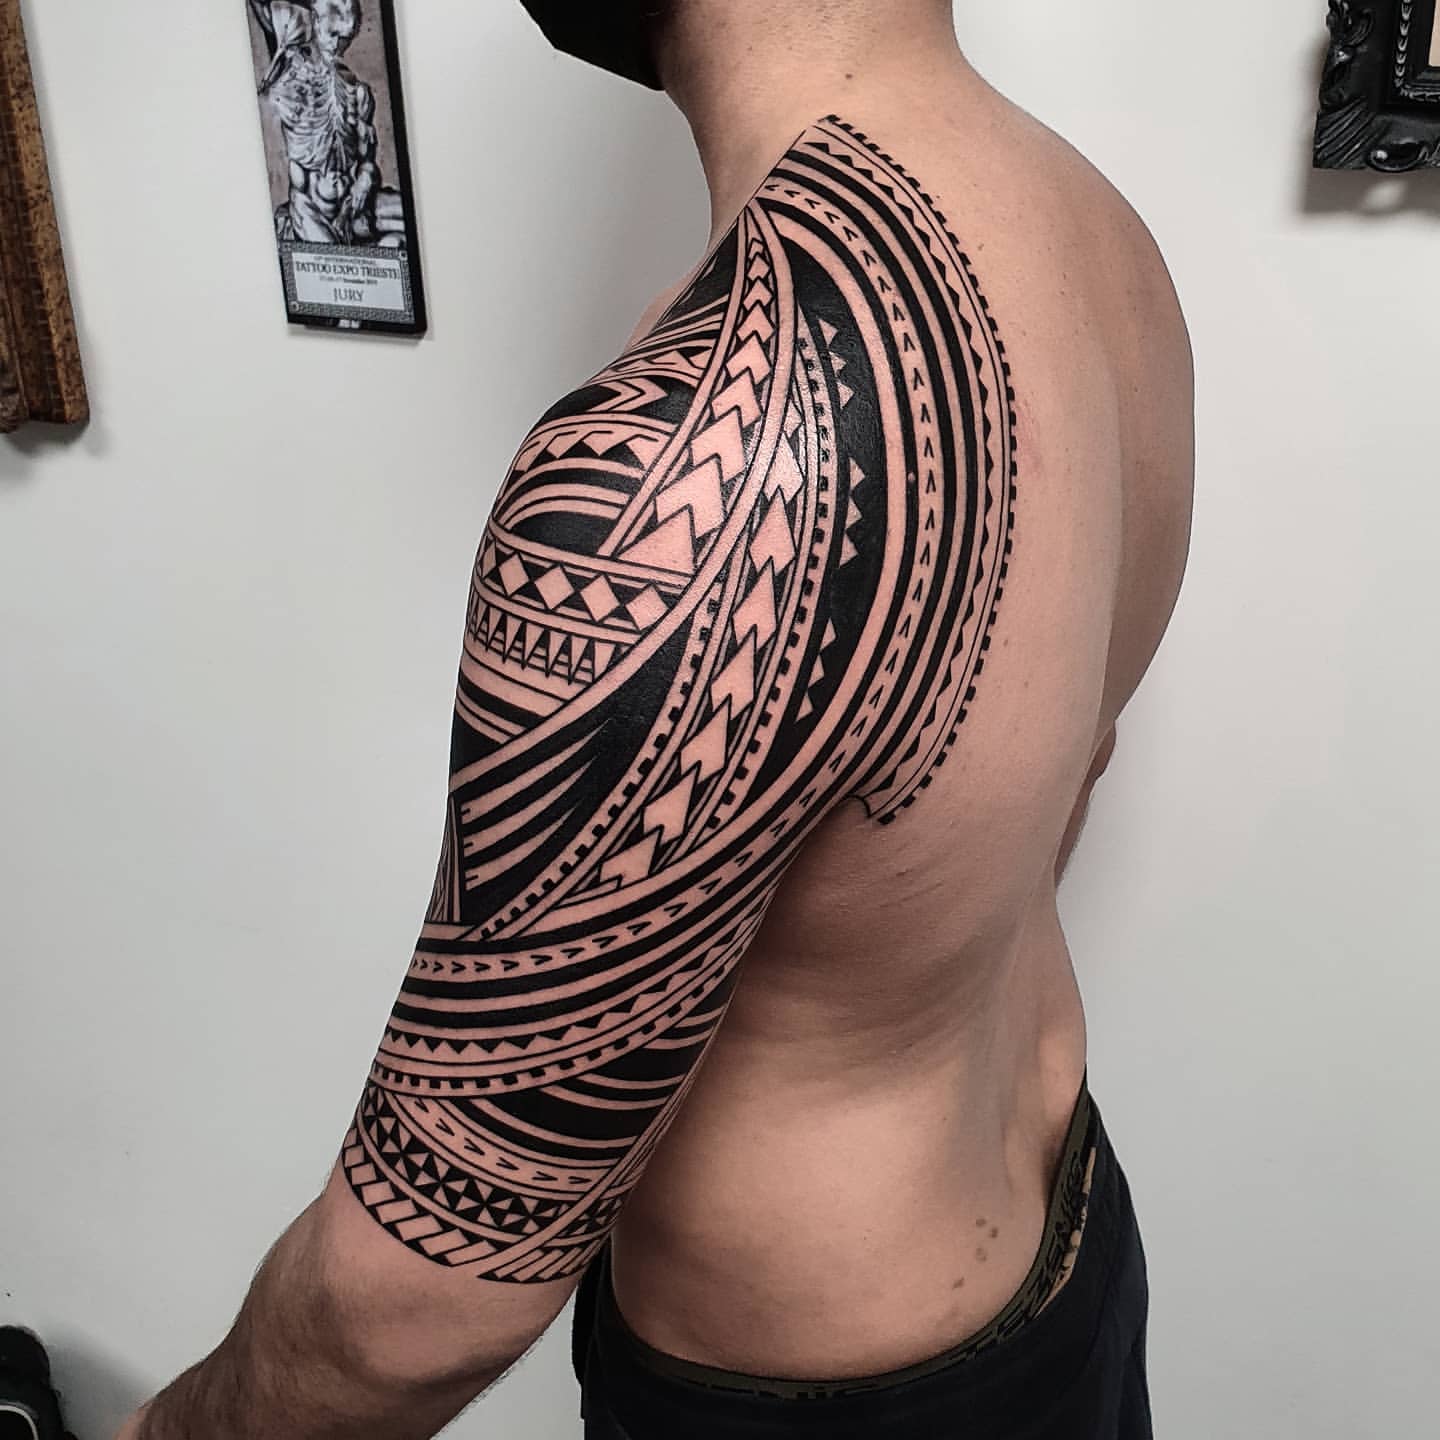 Great part of a sleeve | Wrist tattoos for guys, Family sleeve tattoo, Sleeve  tattoos